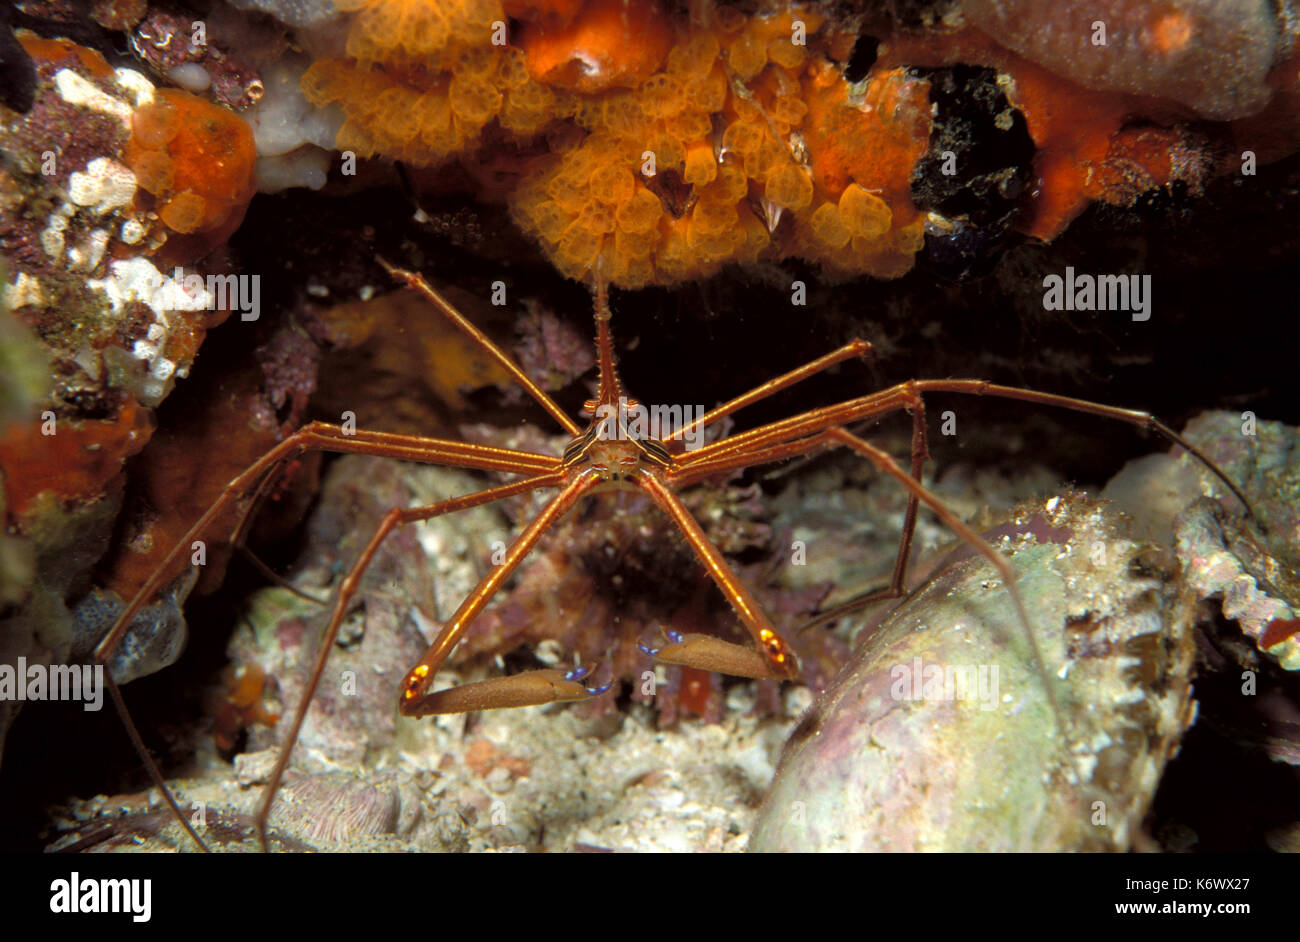 Arrow Crab, Stenorhynchus seticornis, Arrowhead crab on coral, front view, Los Roques Stock Photo